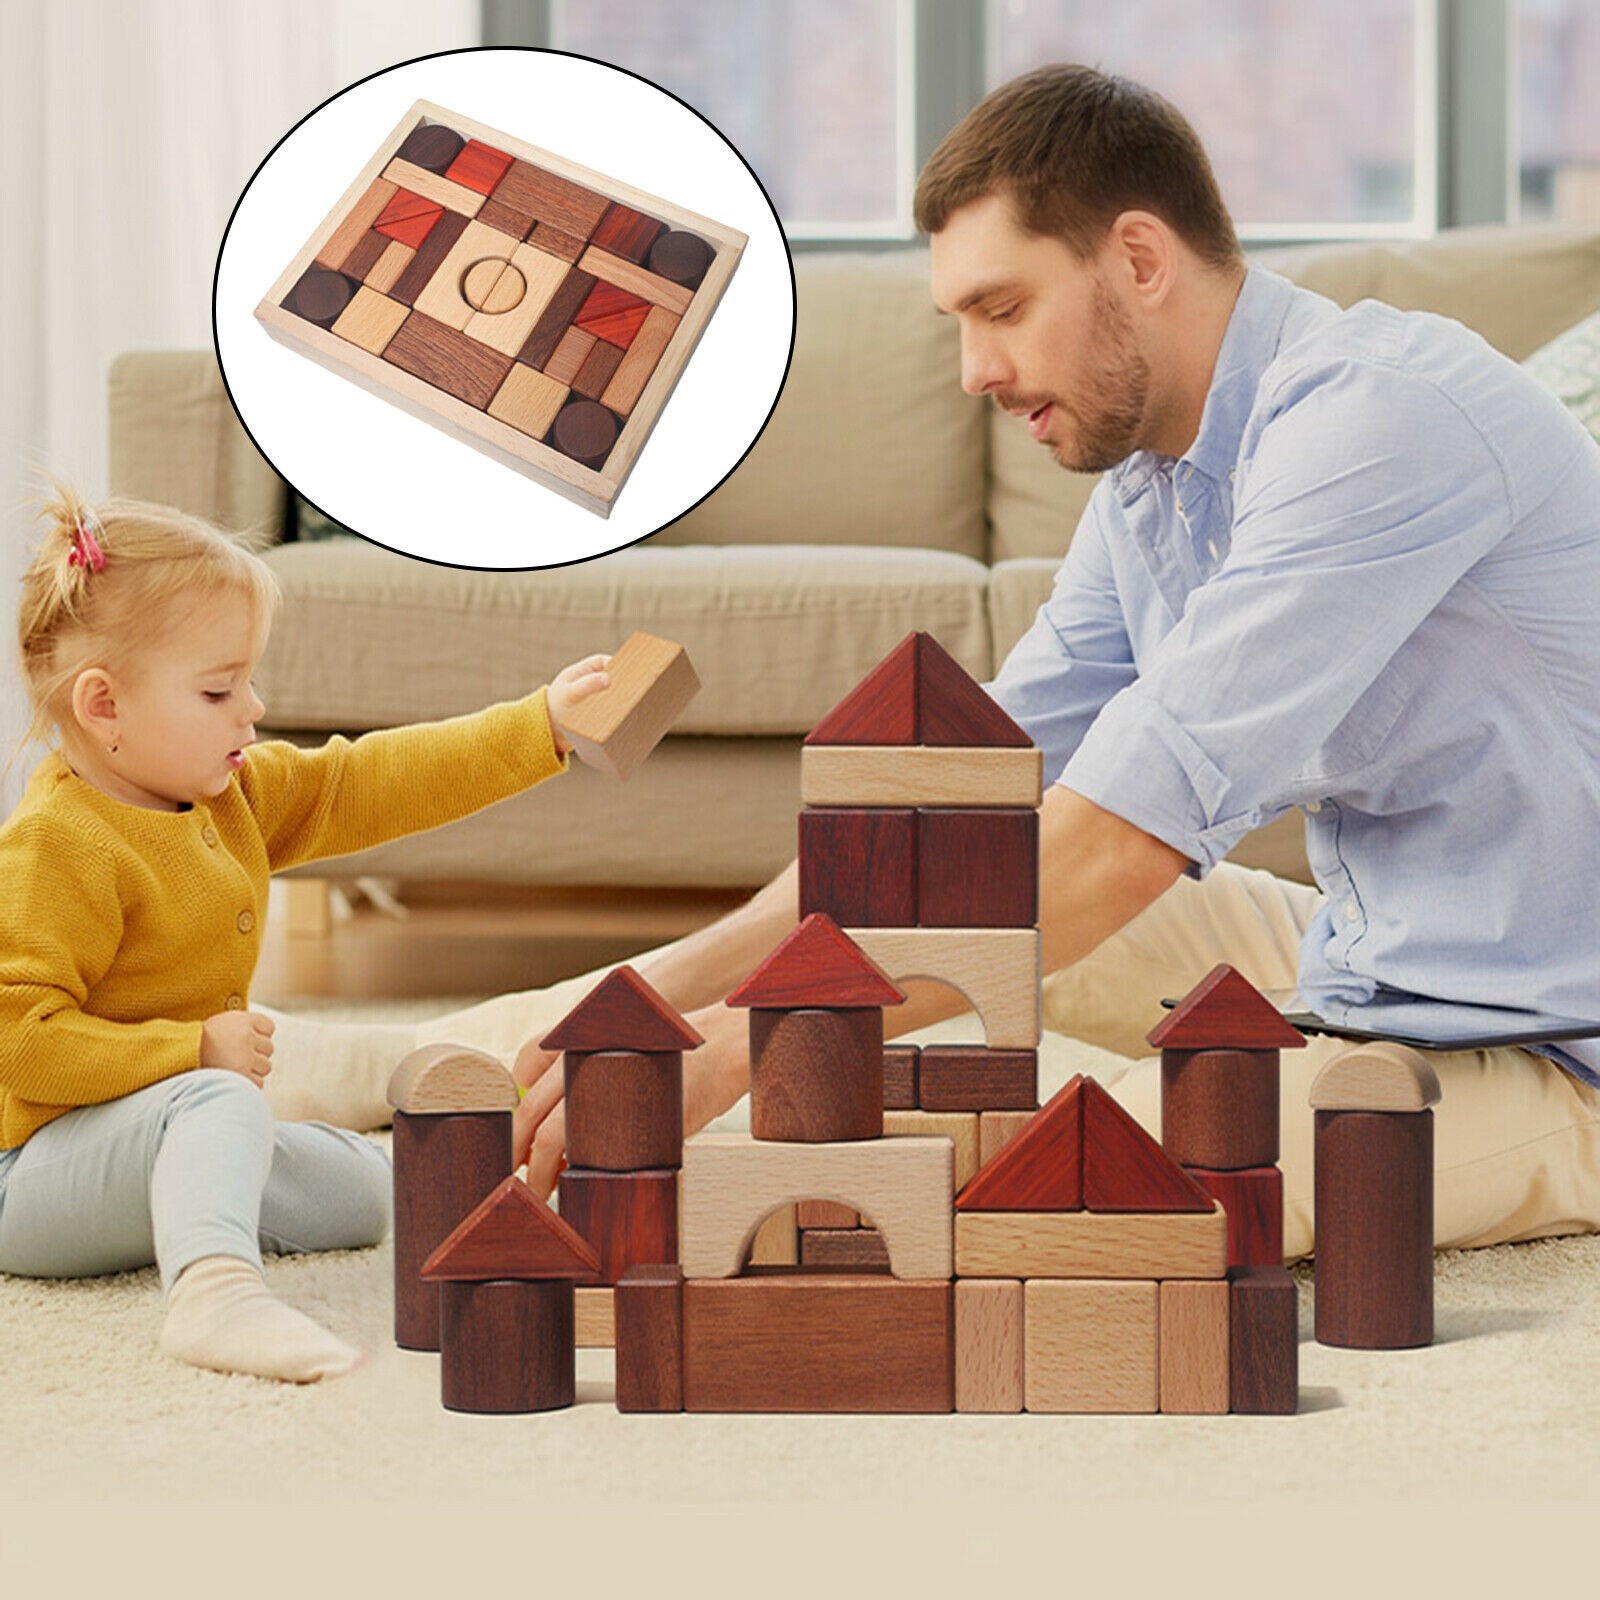 Kids Building Blocks Toys Educational Geometric Shapes Recognition Learning